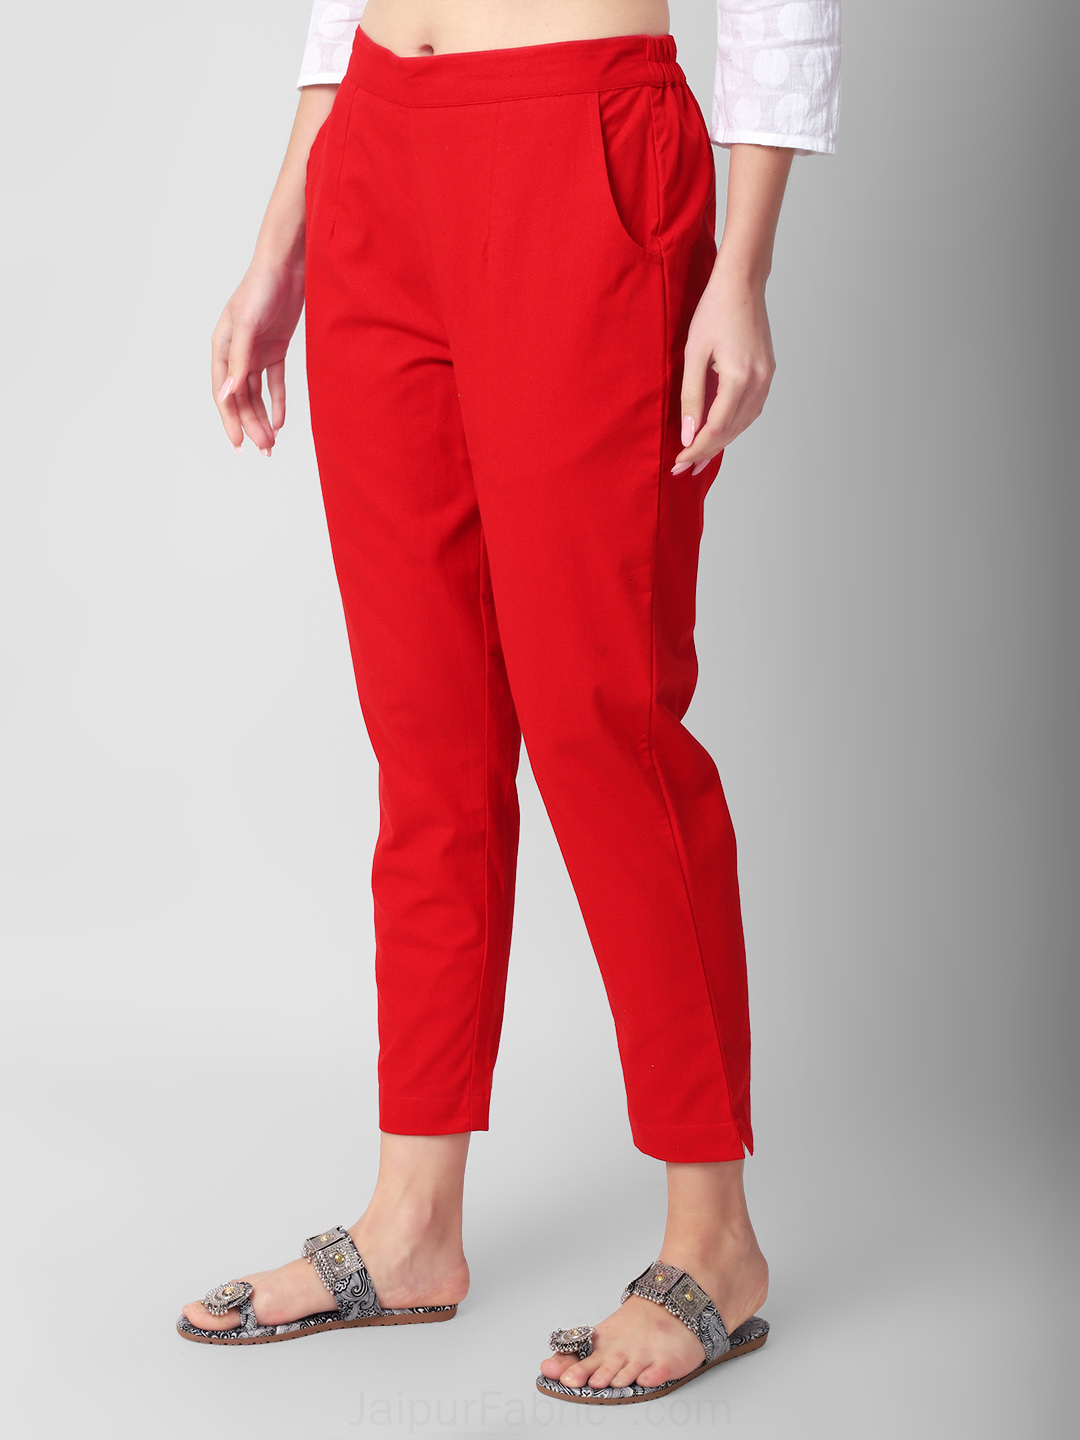 Scarlet Comfort Women Cotton Pants casual and semi formal daily trousers